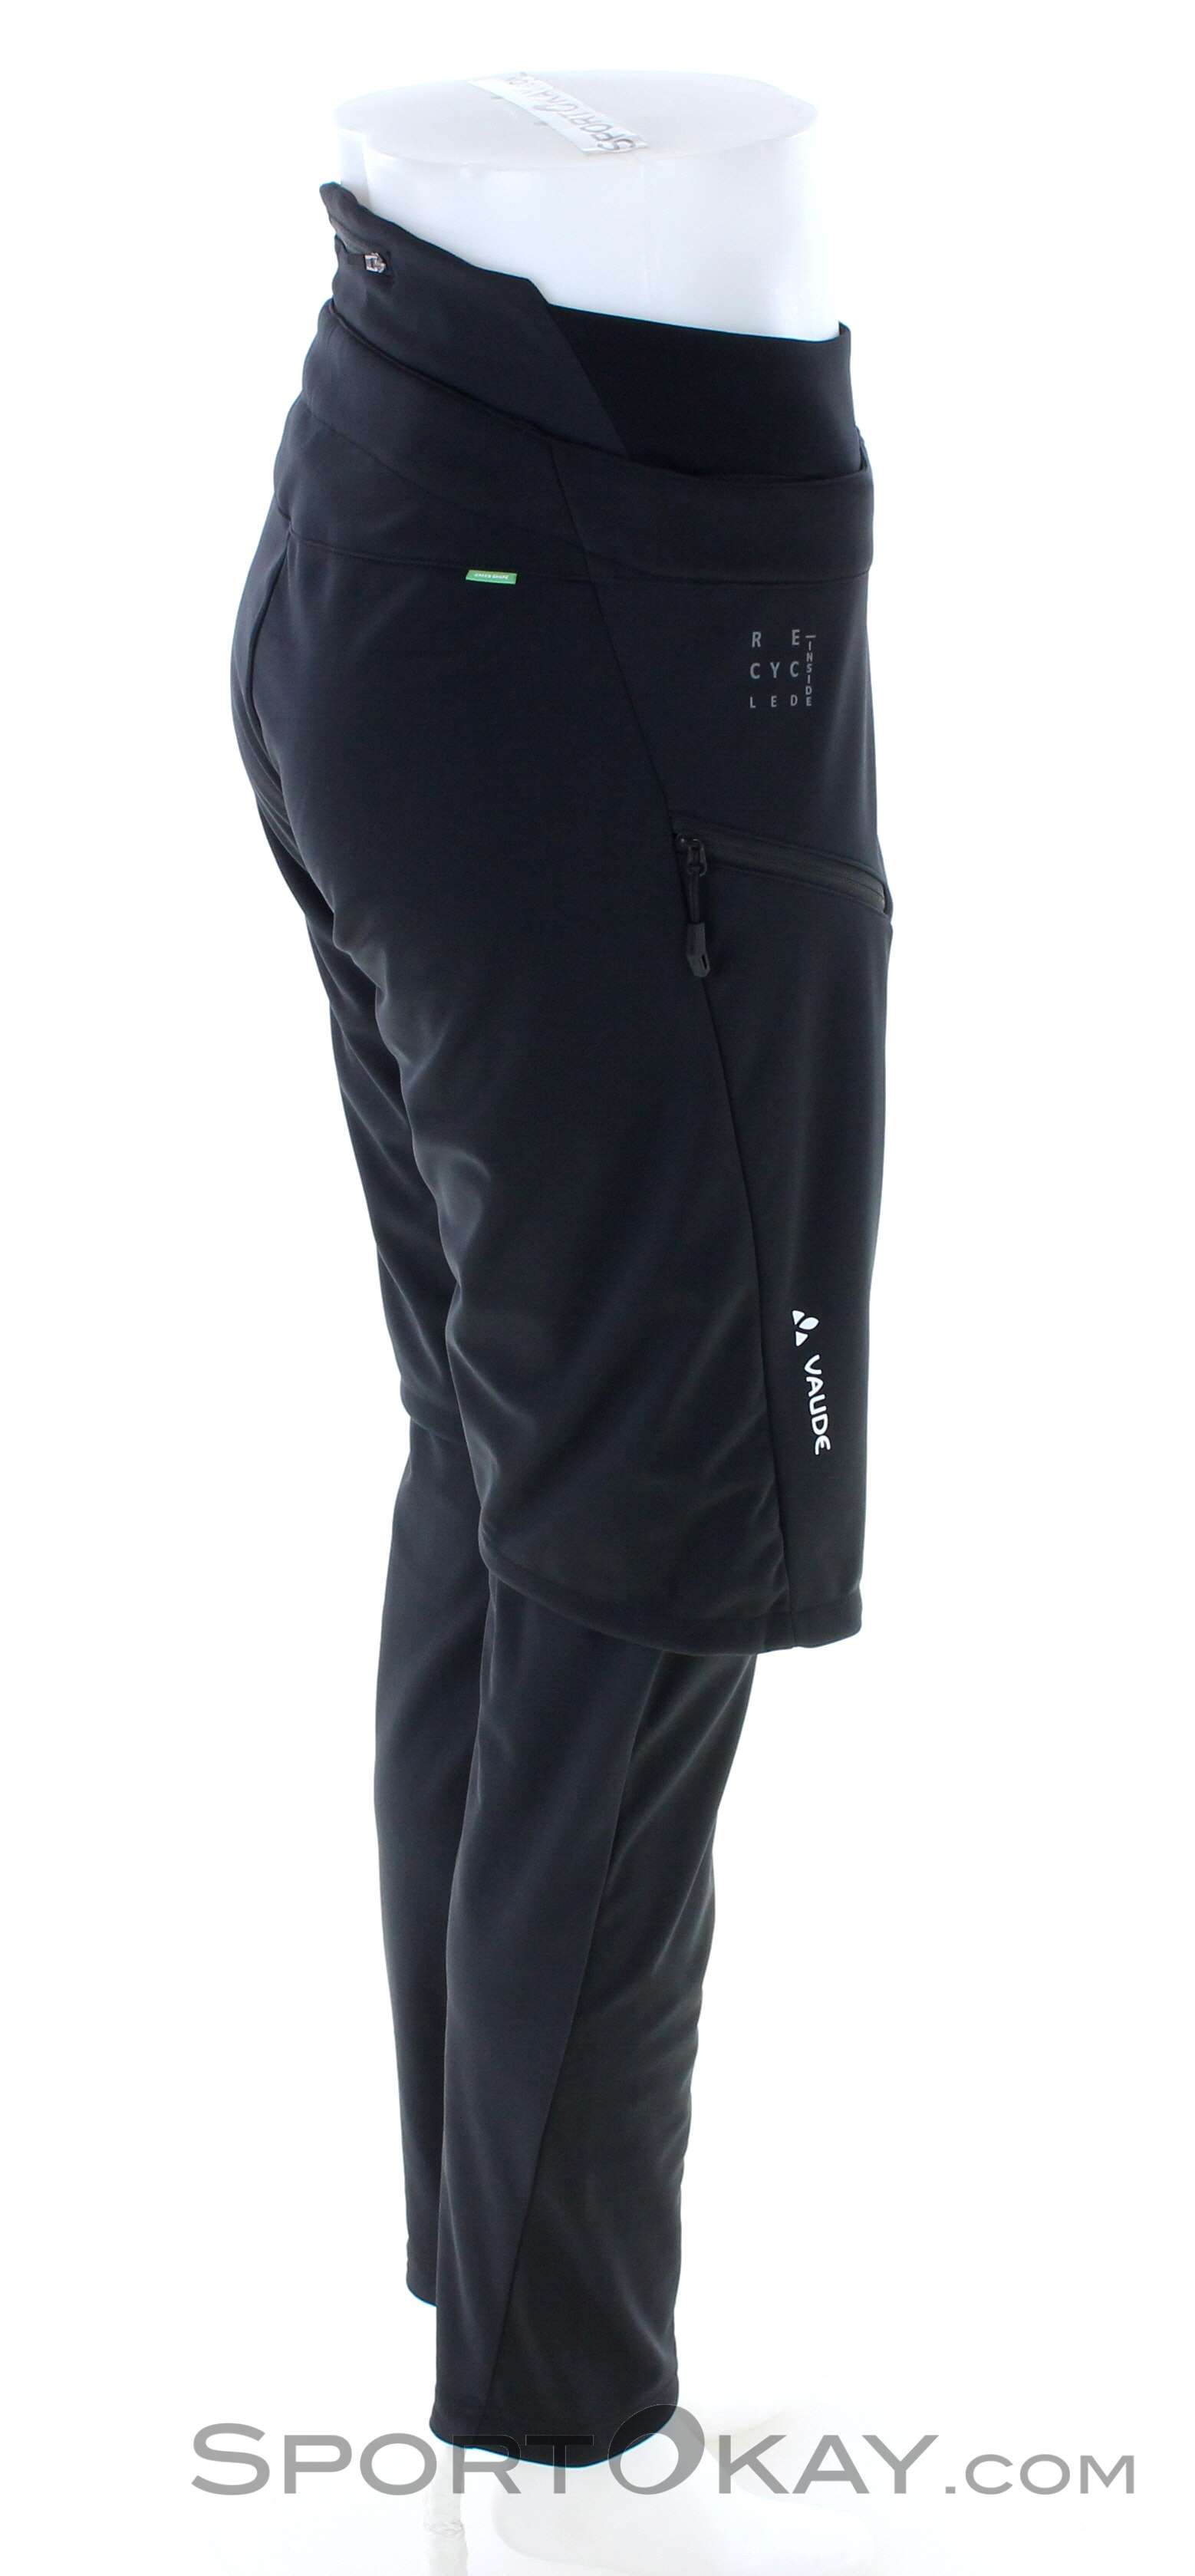 All Year Moab softshell cycling pants women's